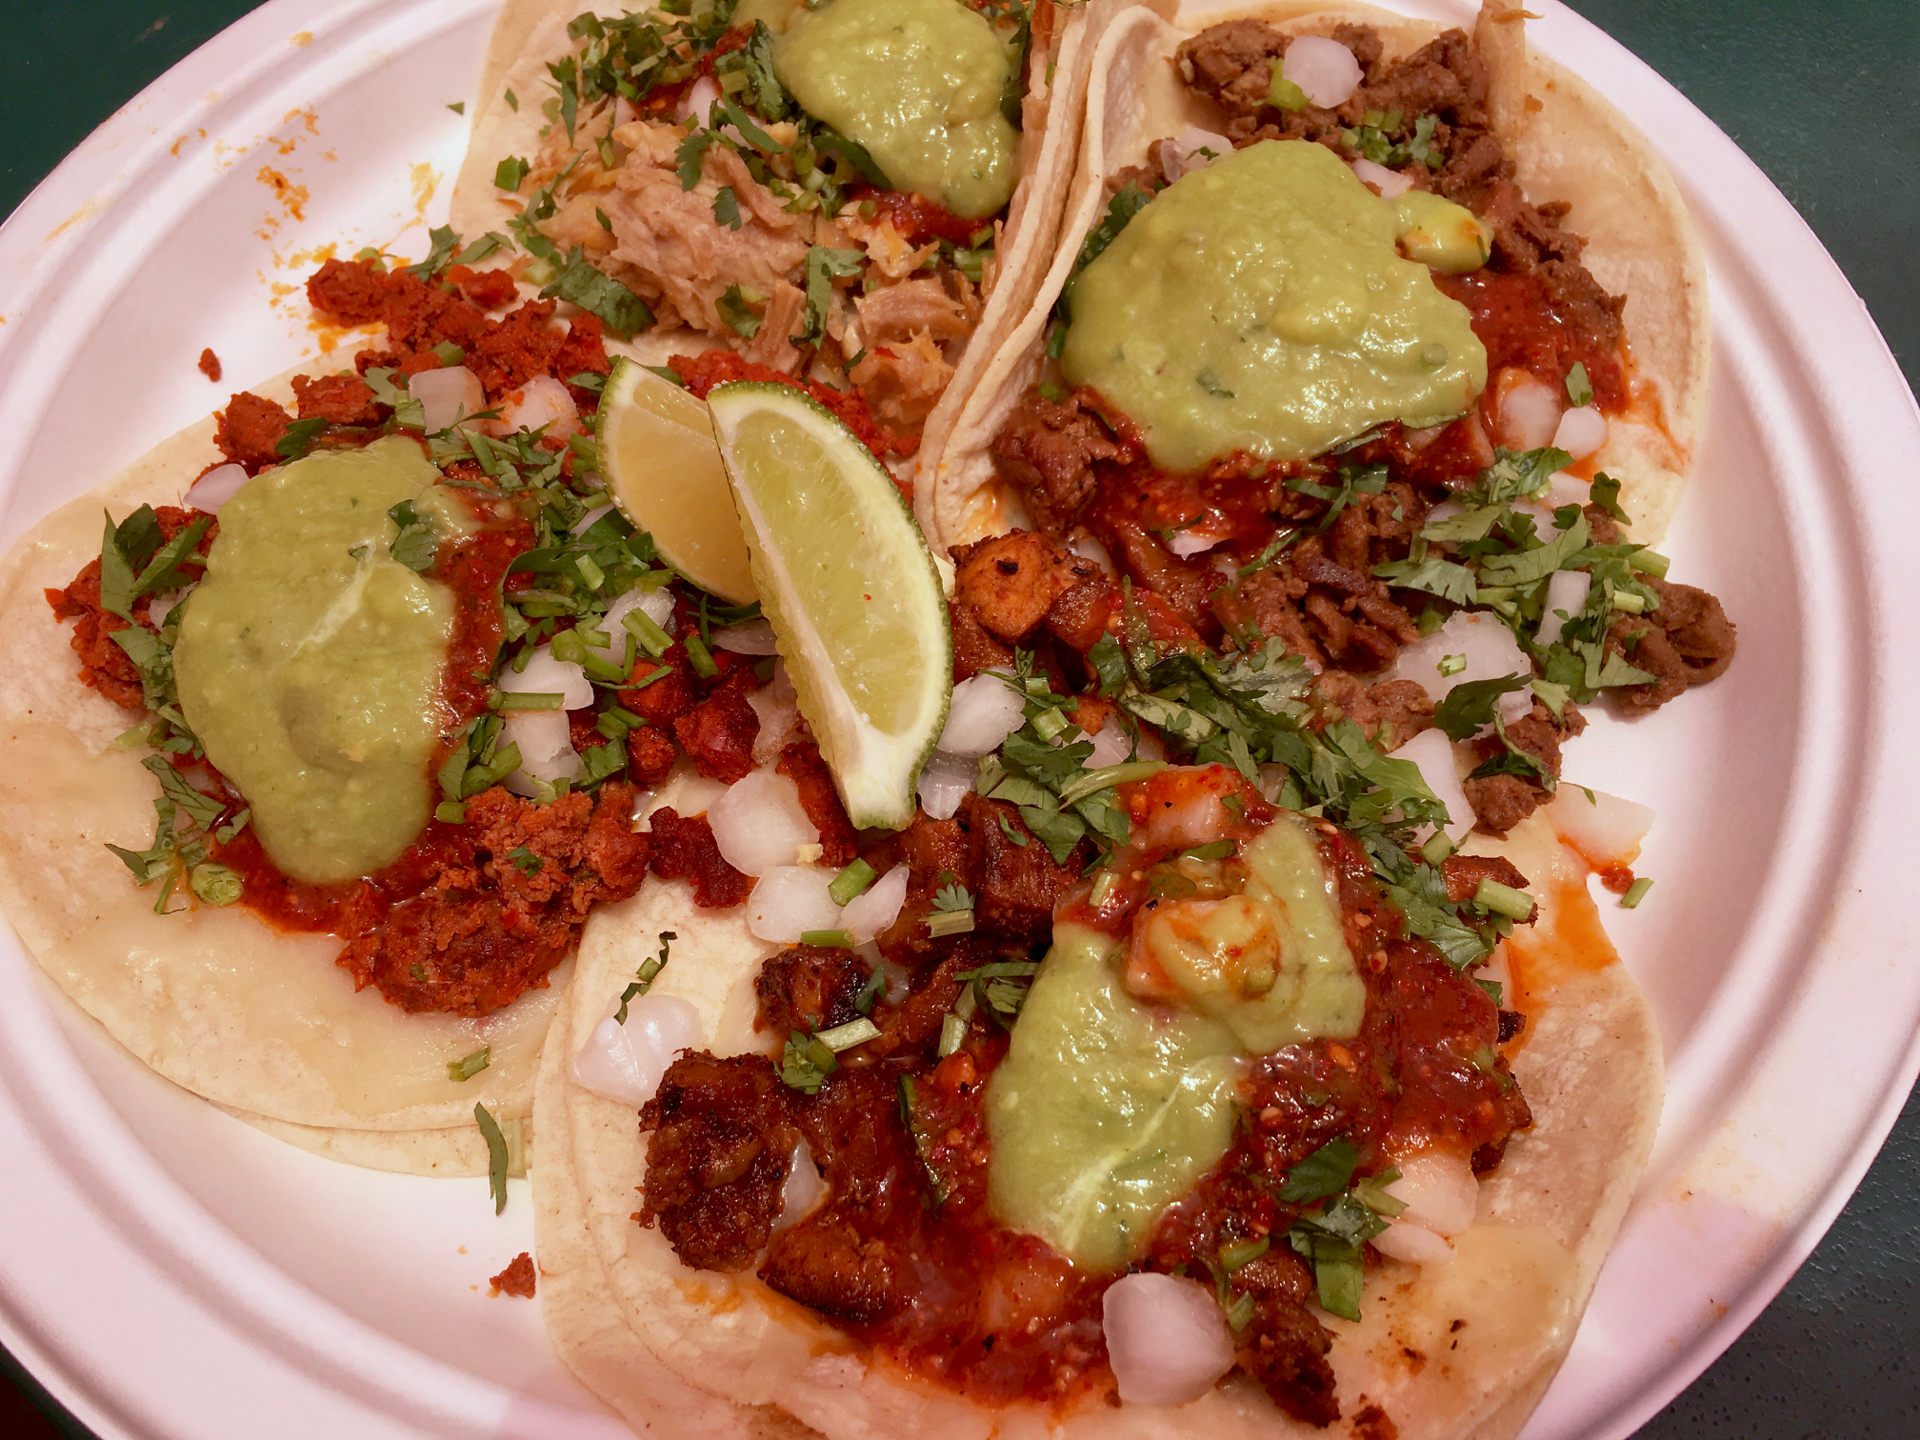 A plate of vampiro tacos at Ruby’s Taqueria in Sunnyvale.